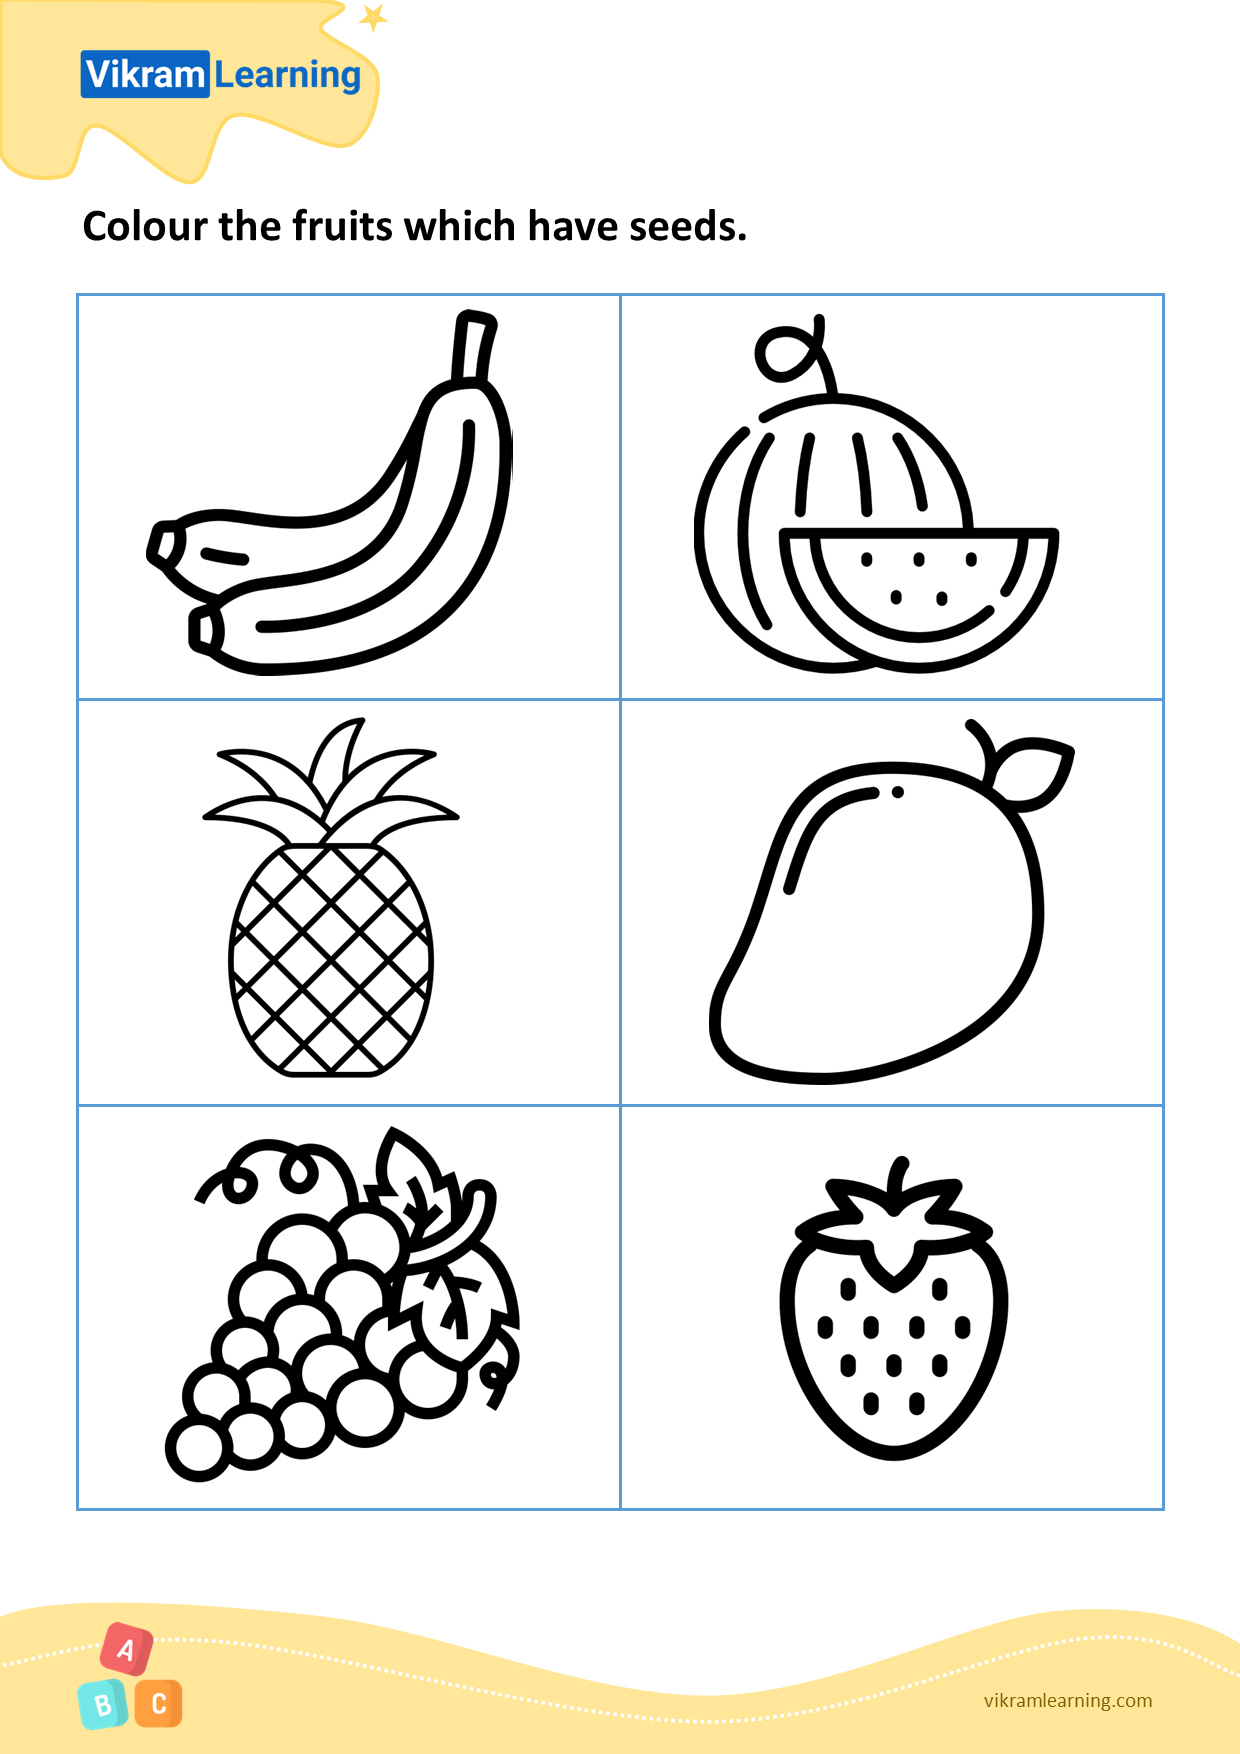 Download colour the fruits which have seeds - pattern 1 worksheets